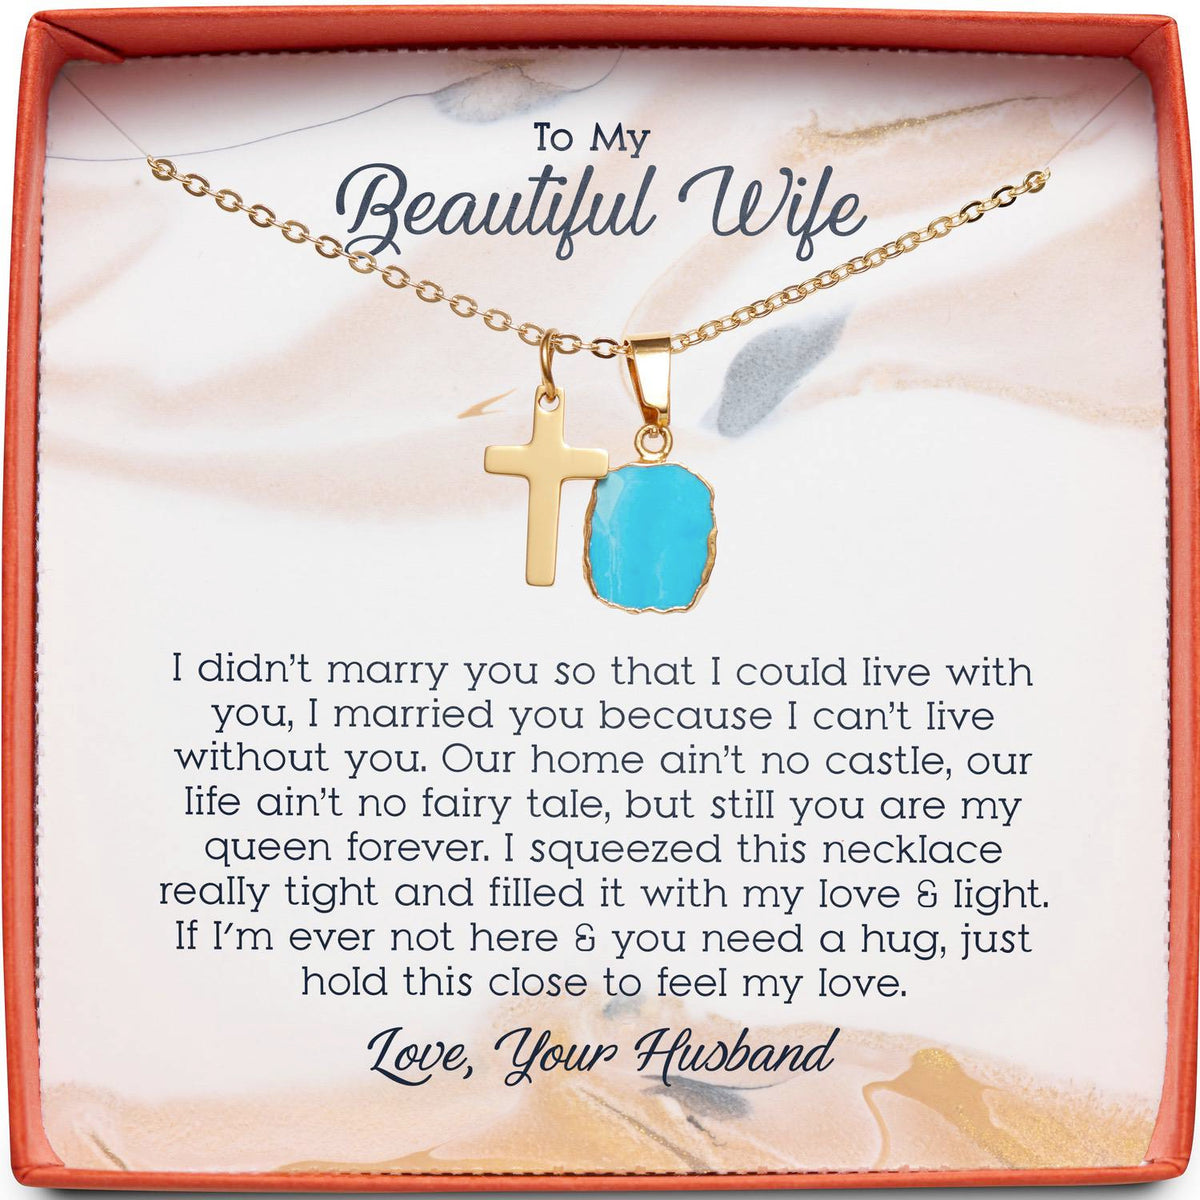 To My Beautiful Wife | I Squeezed This Necklace | Cross Necklace